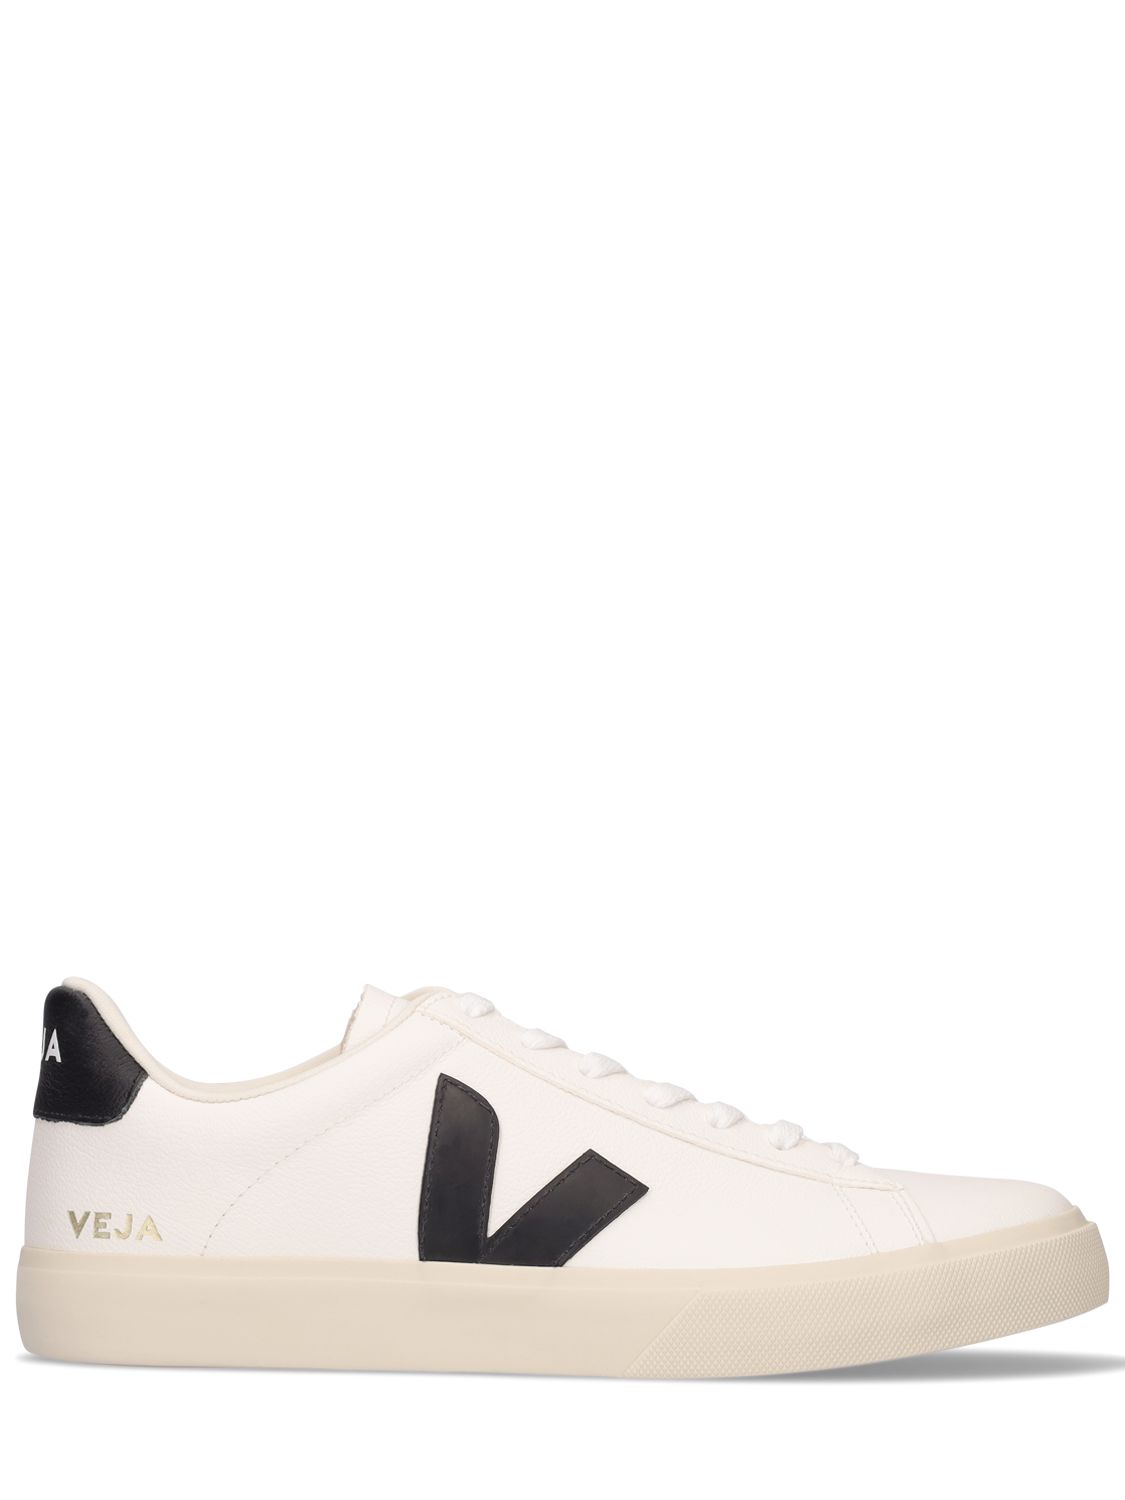 Veja Campo Low Sneakers In White